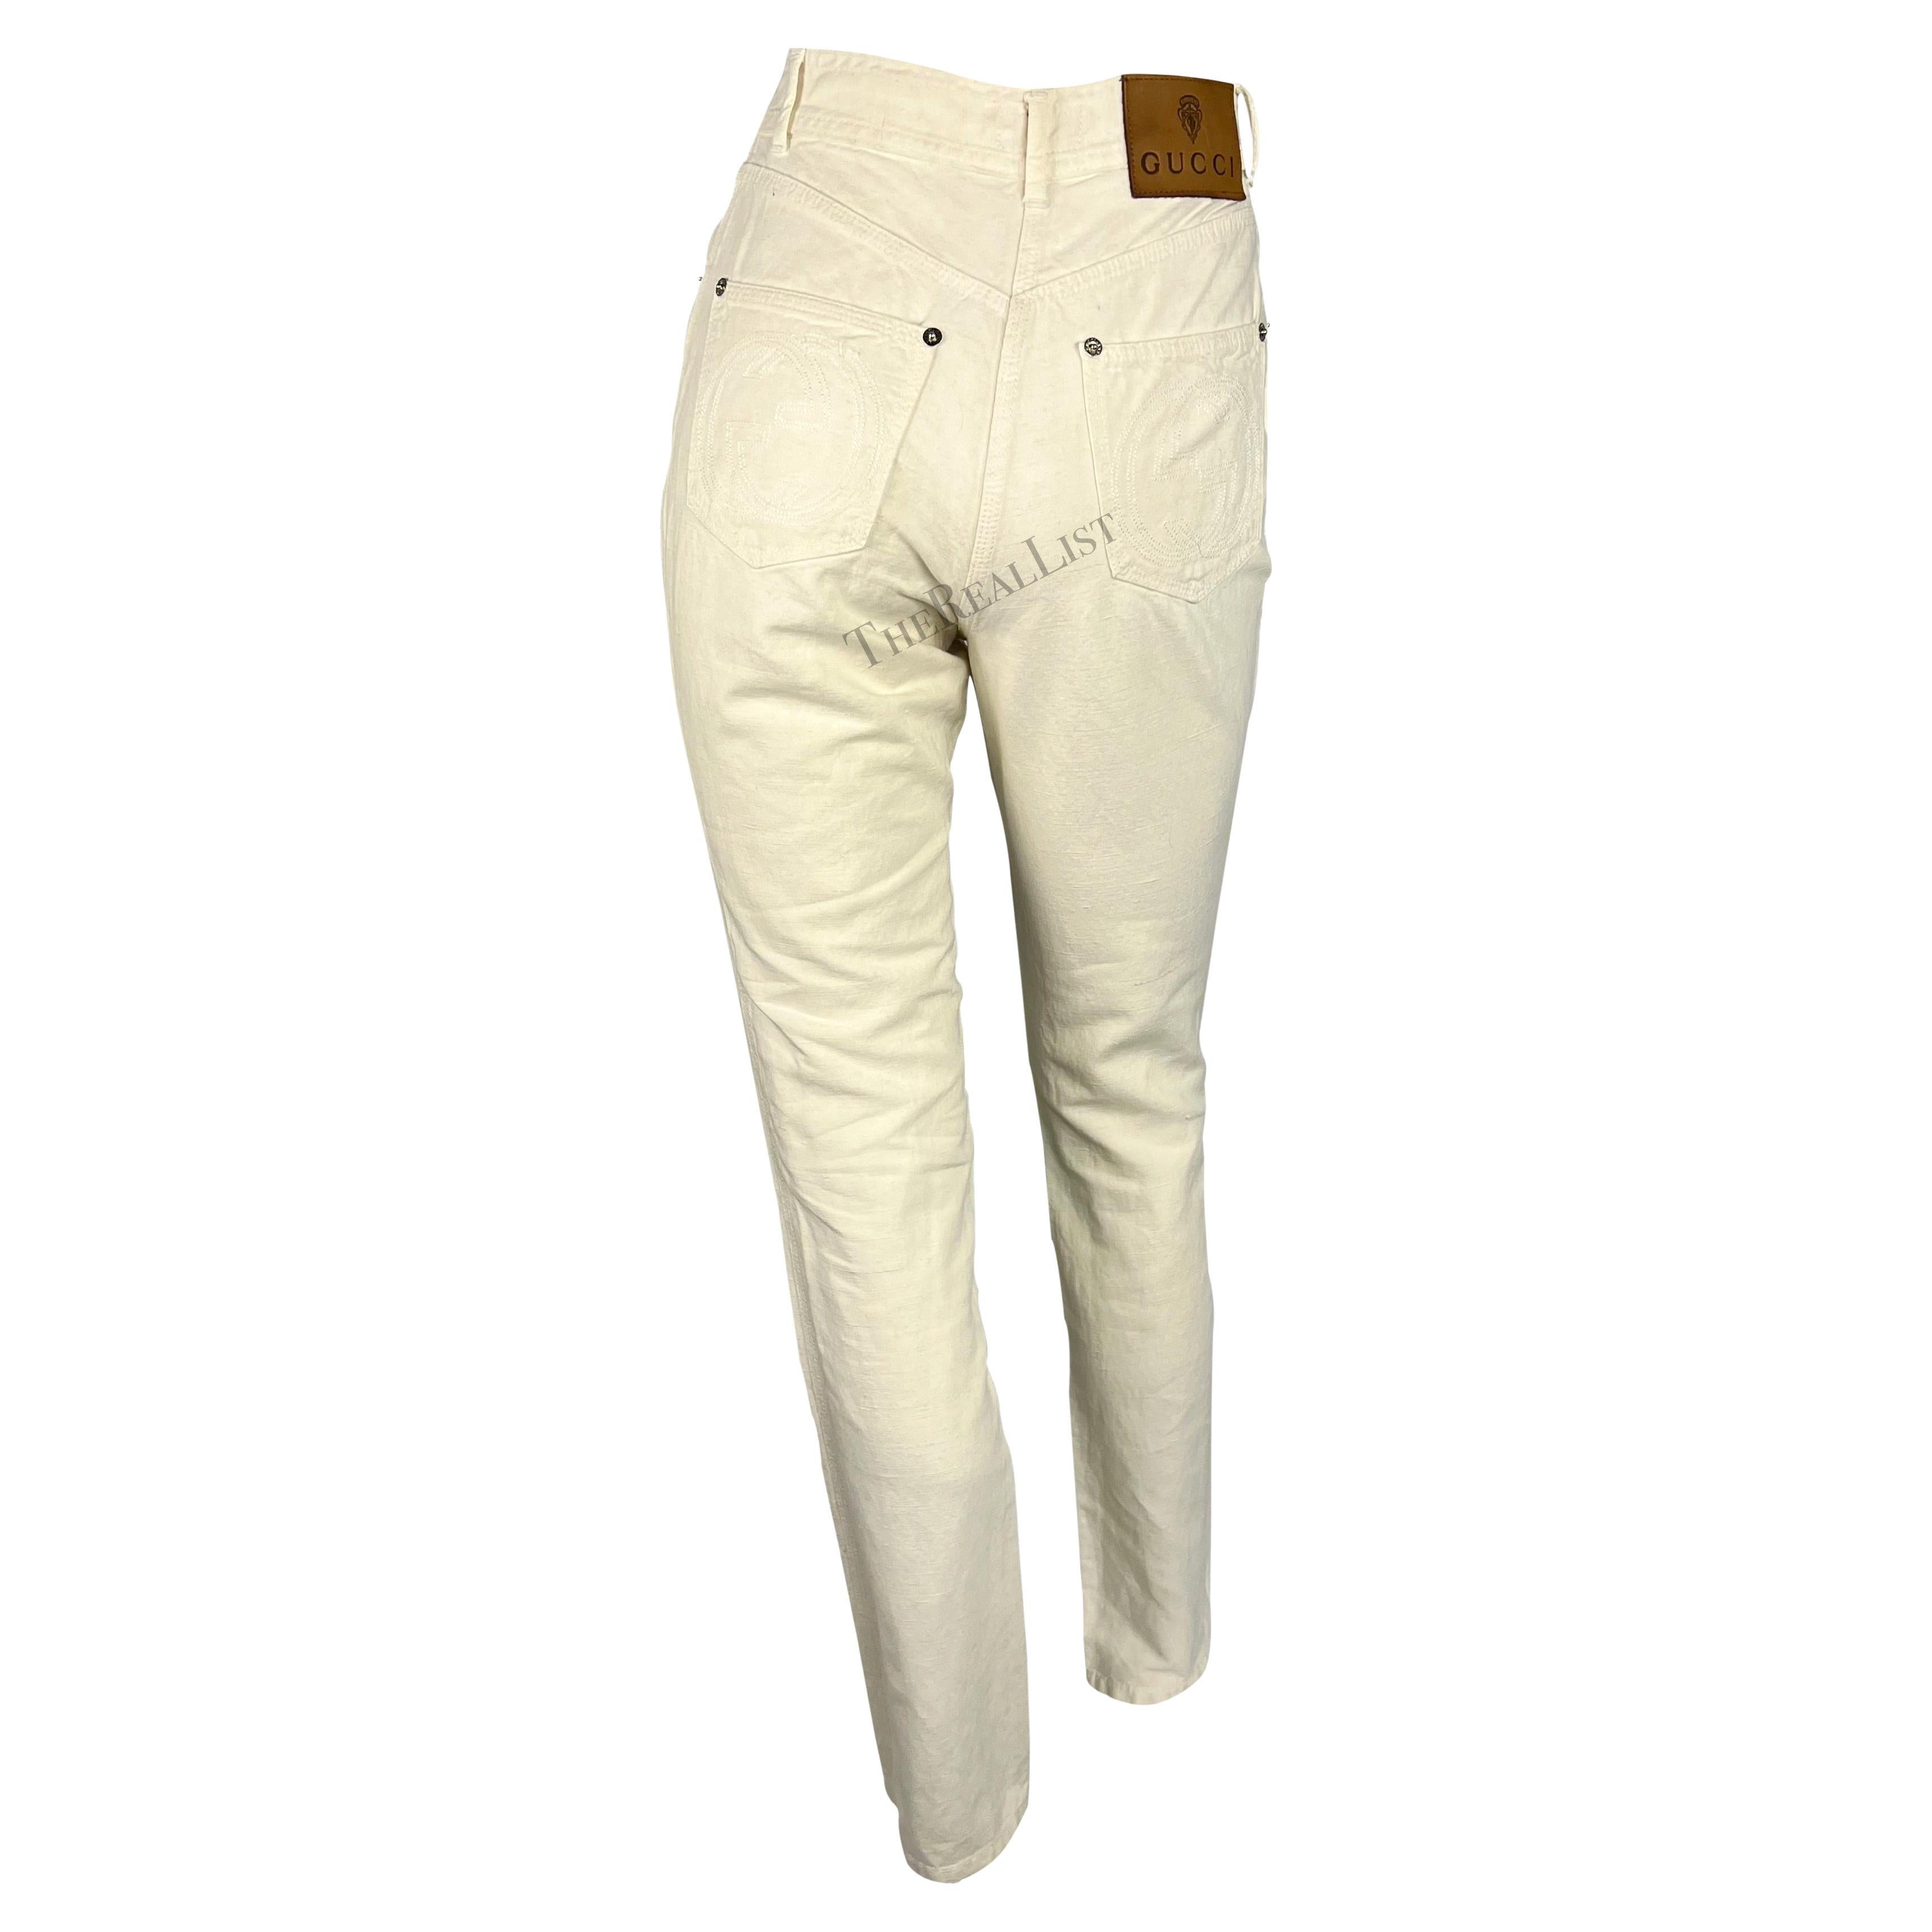 NWT S/S 1995 Gucci by Tom Ford GG Cream Cotton Linen Jeans For Sale